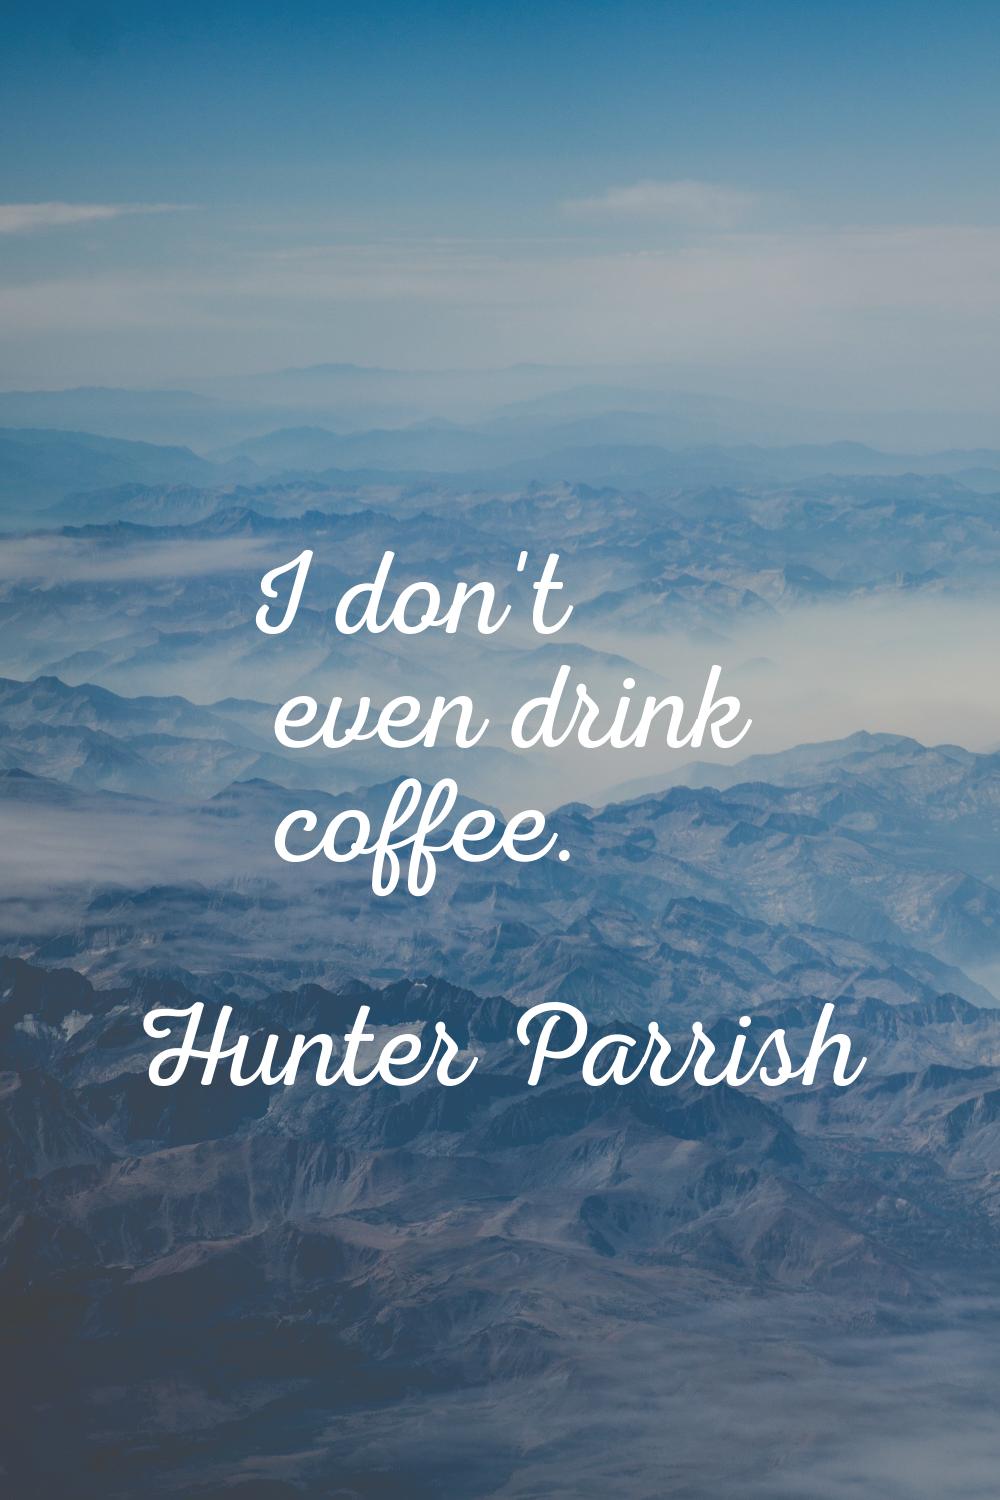 I don't even drink coffee.